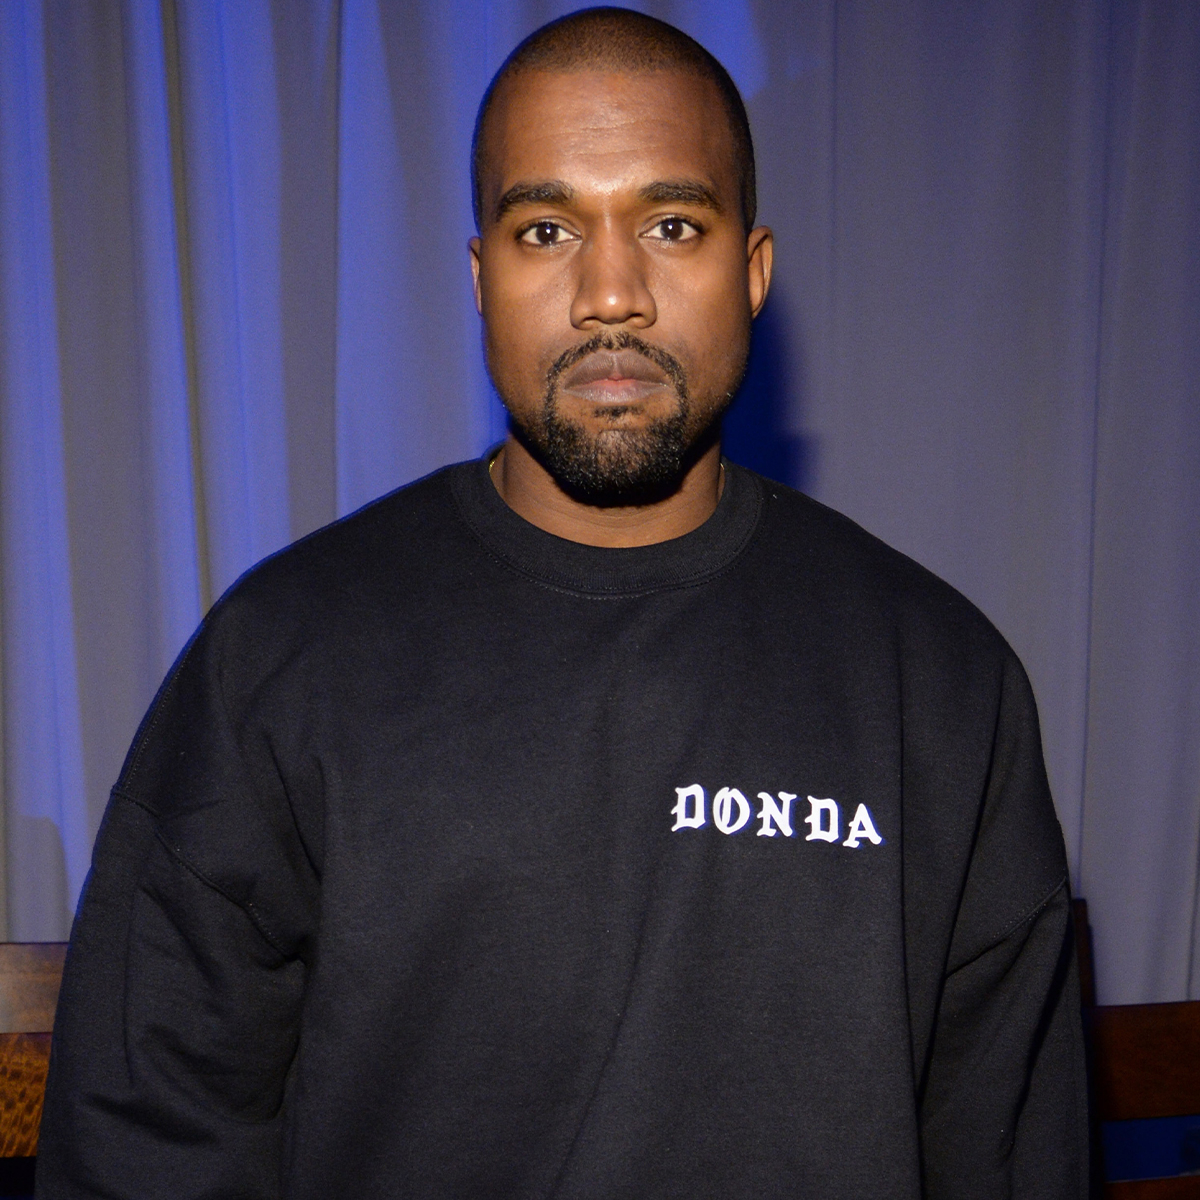 Kanye West Paid Former Employee Who Accused Him of Praising Hitler